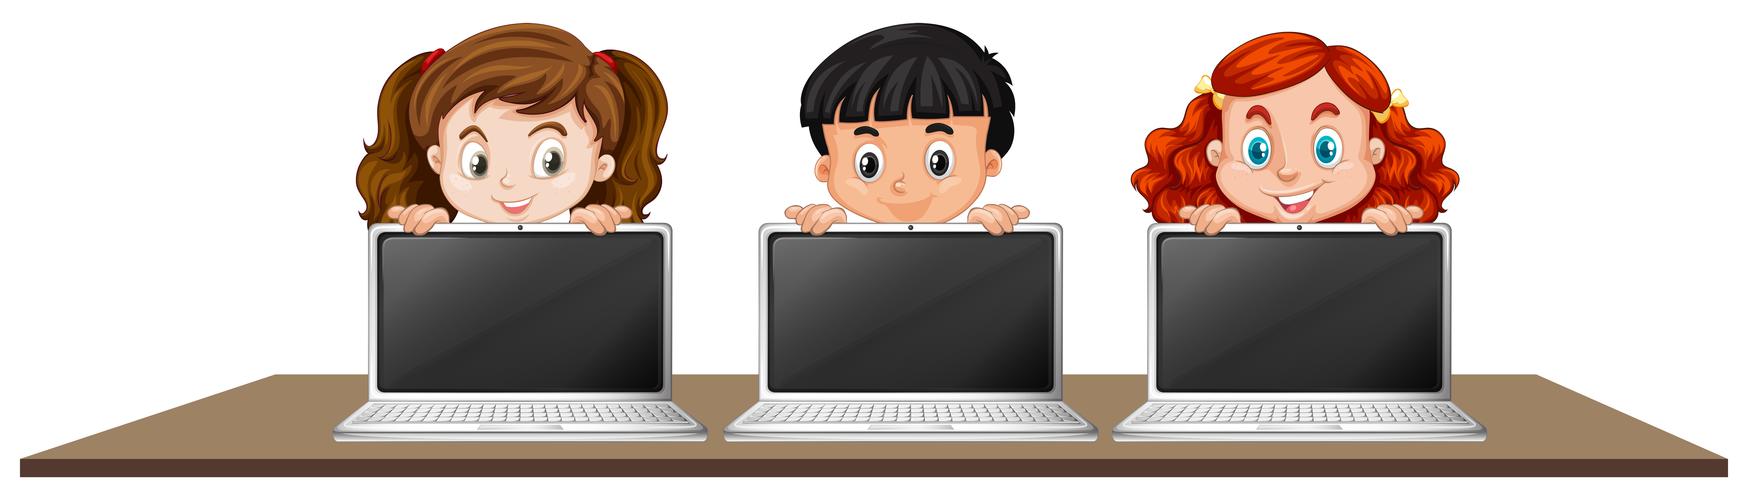 Children with Laptop on White Background vector